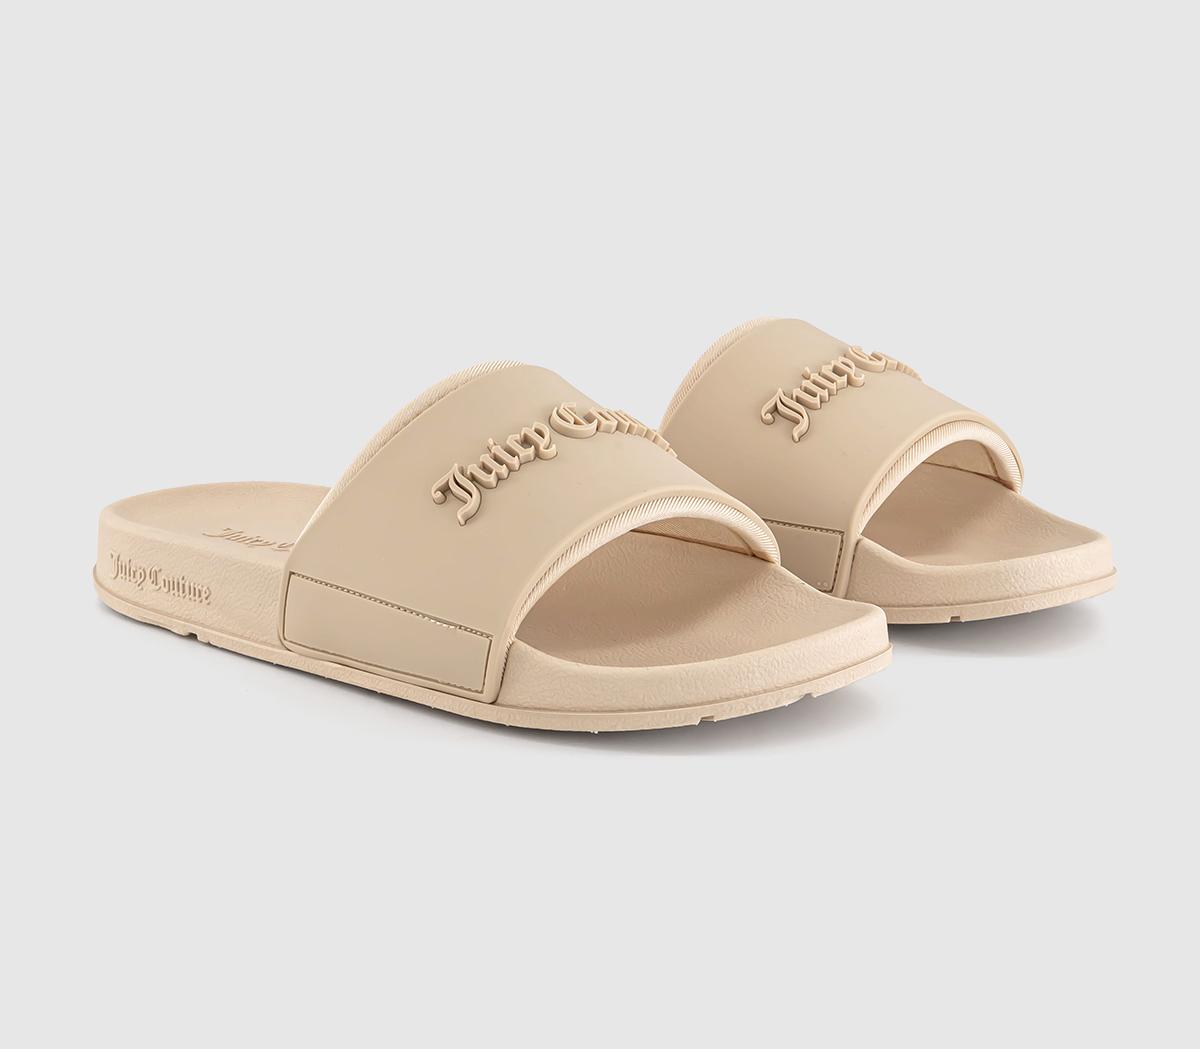 Juicy Couture Womens Breanna Debossed Sliders Brazilian Sand Natural, 8